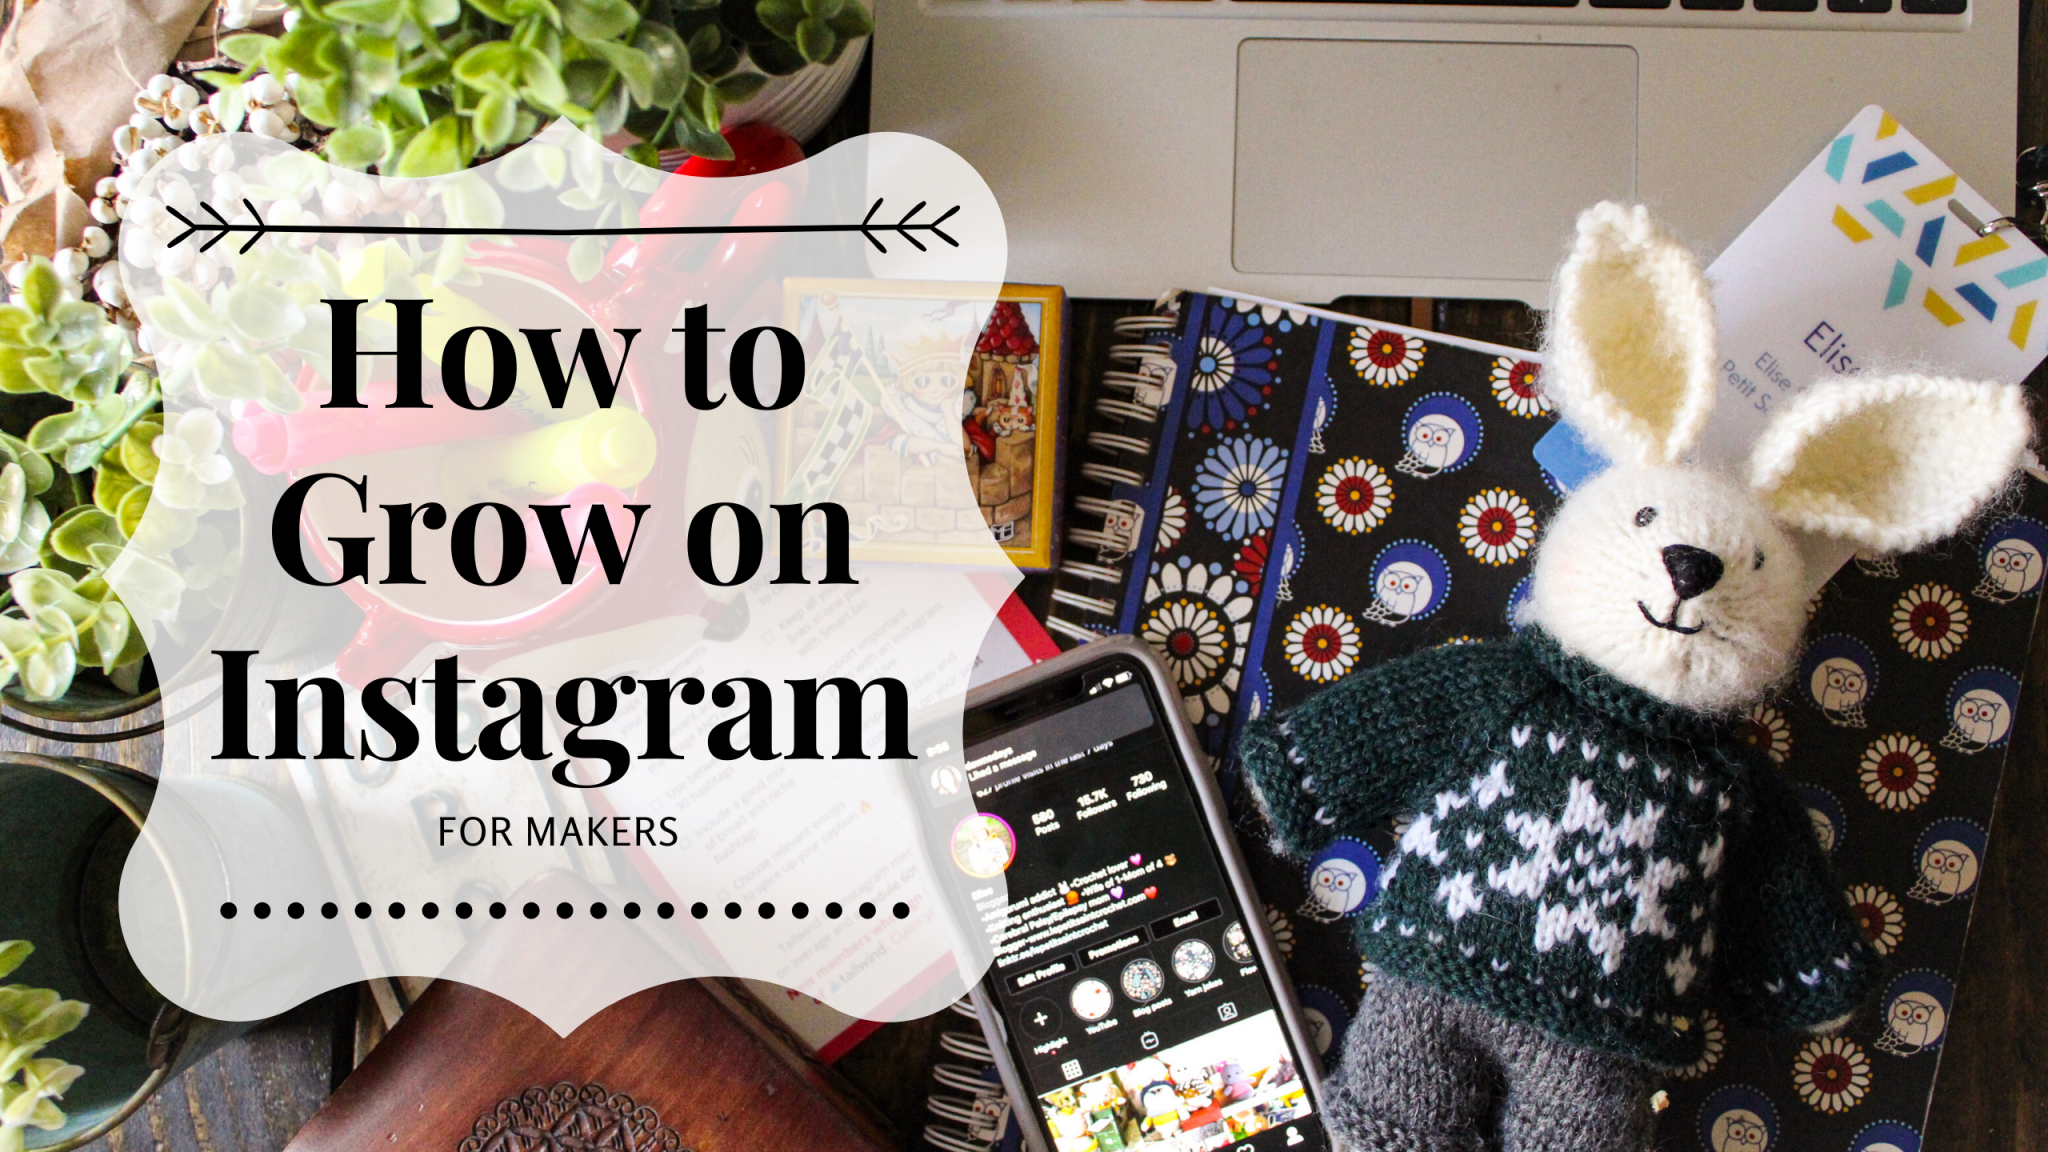 How to Grow on Instagram for Makers